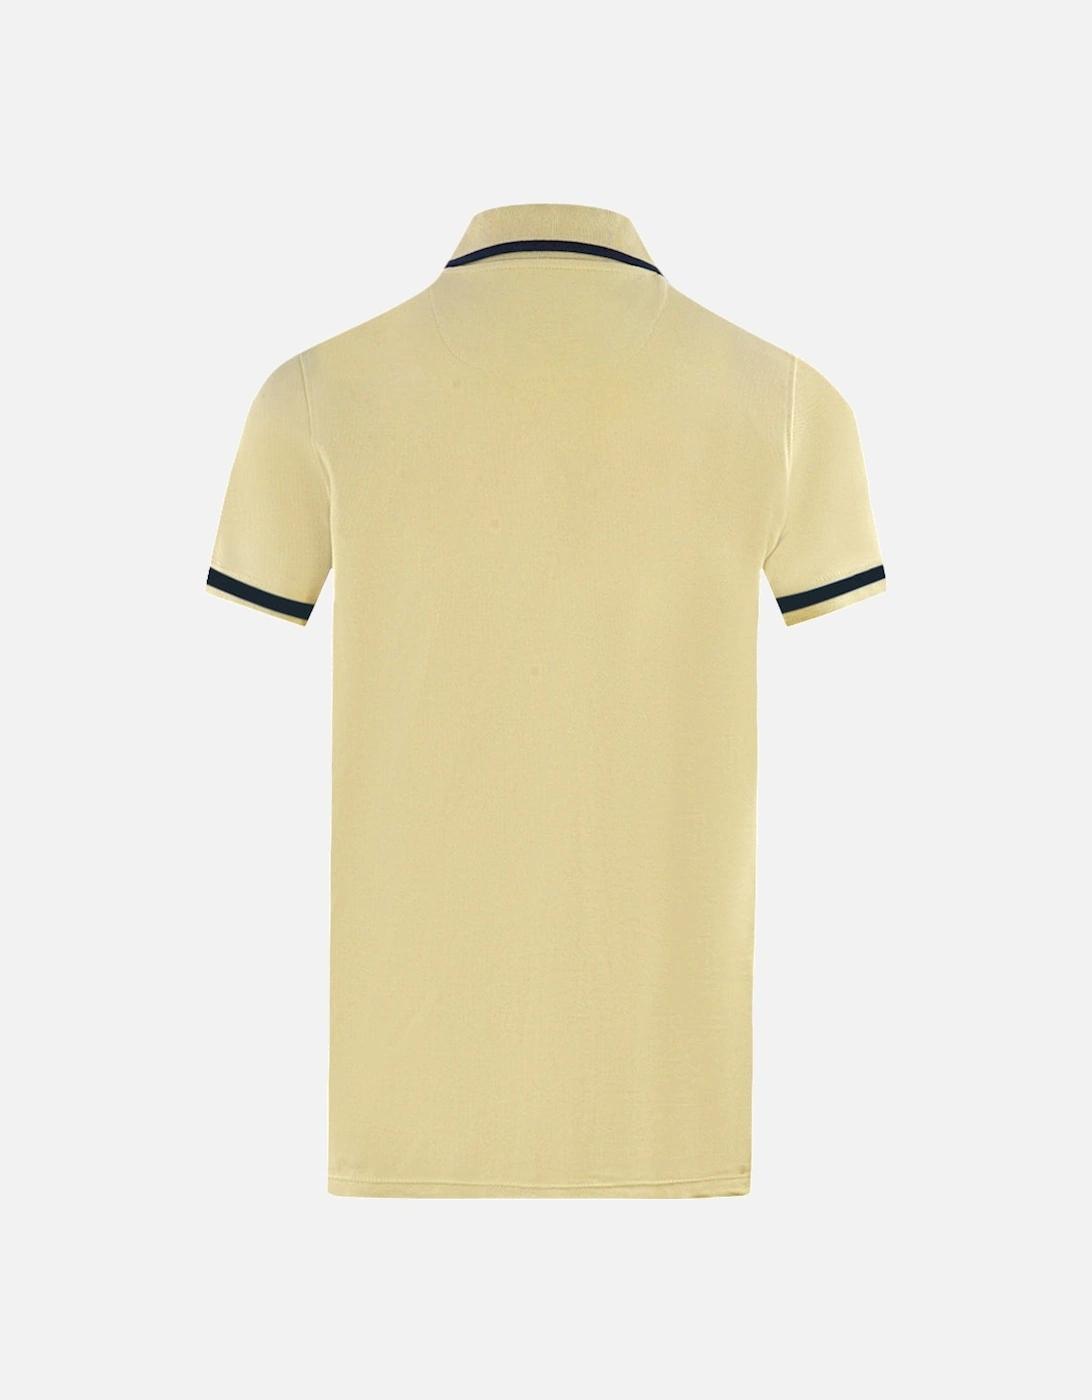 London Embroidered Badge Beige Polo Shirt